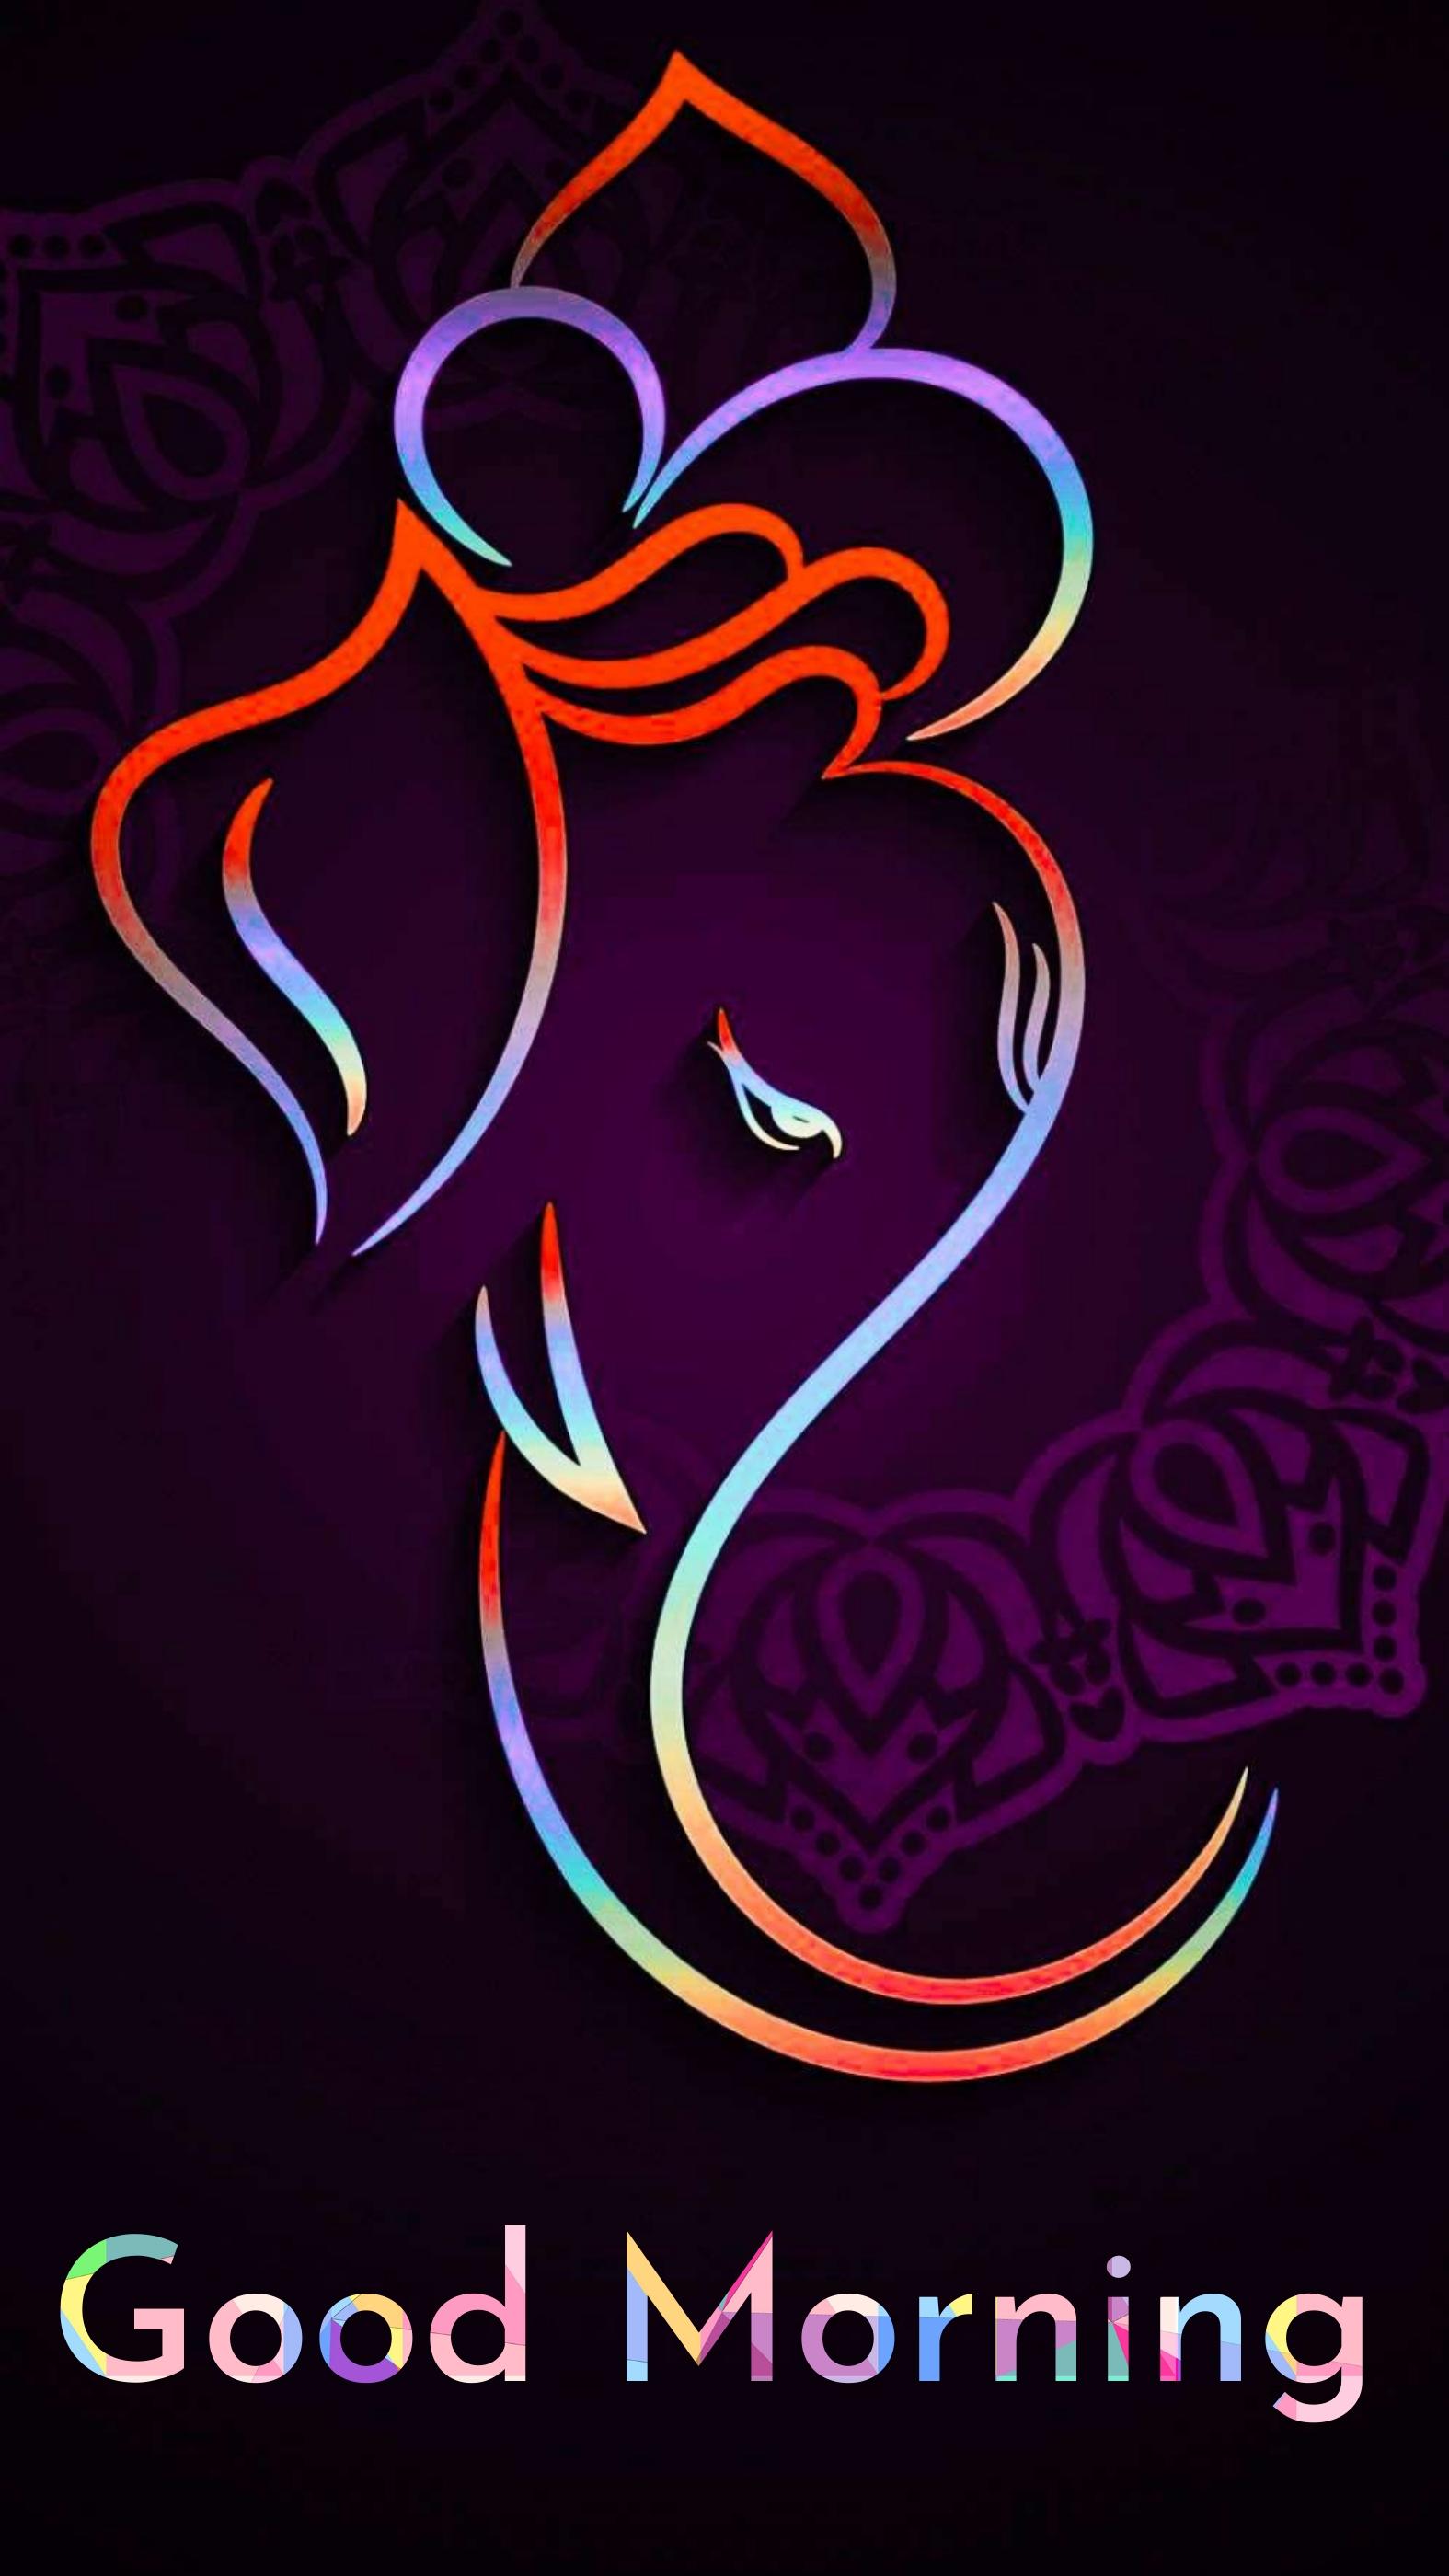 Highdefinition wallpapers of Lord Ganesha for your PC